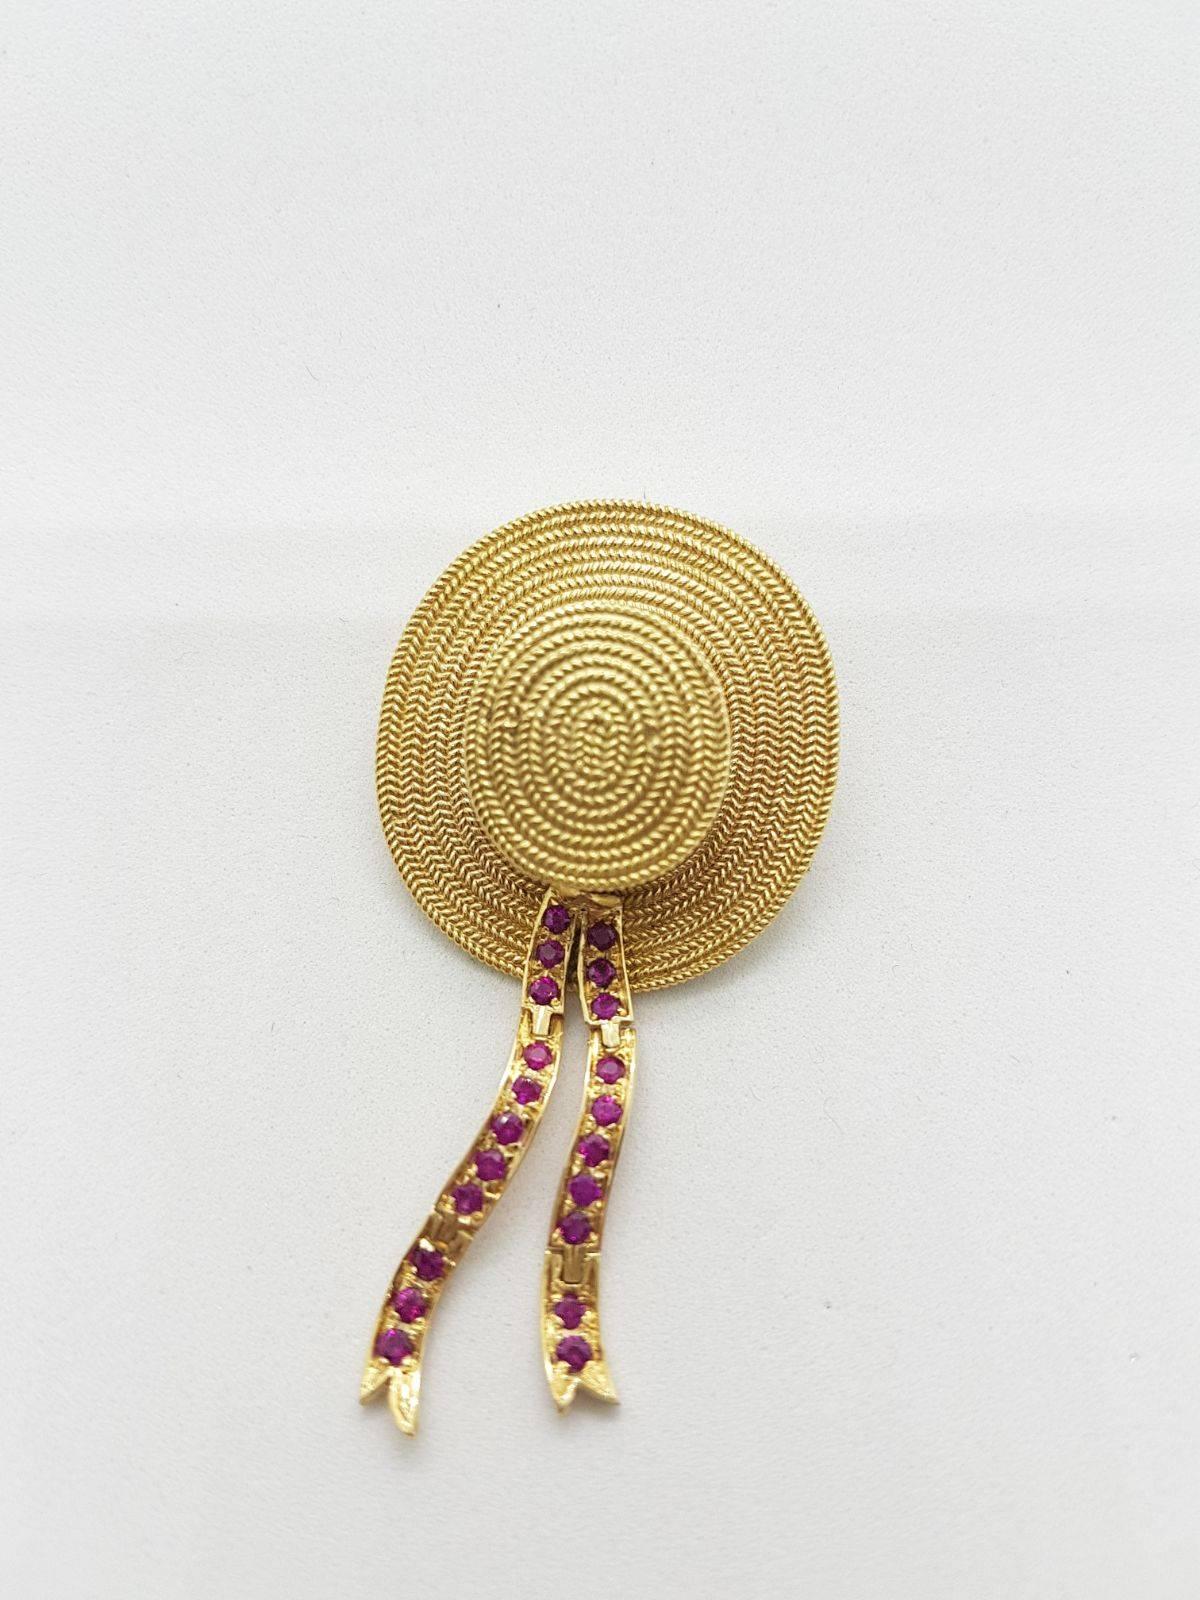 Hand made broach in Yellow 18KT gold with 1.32 carats of Rubies. Can be worn as a broach or a pendant.